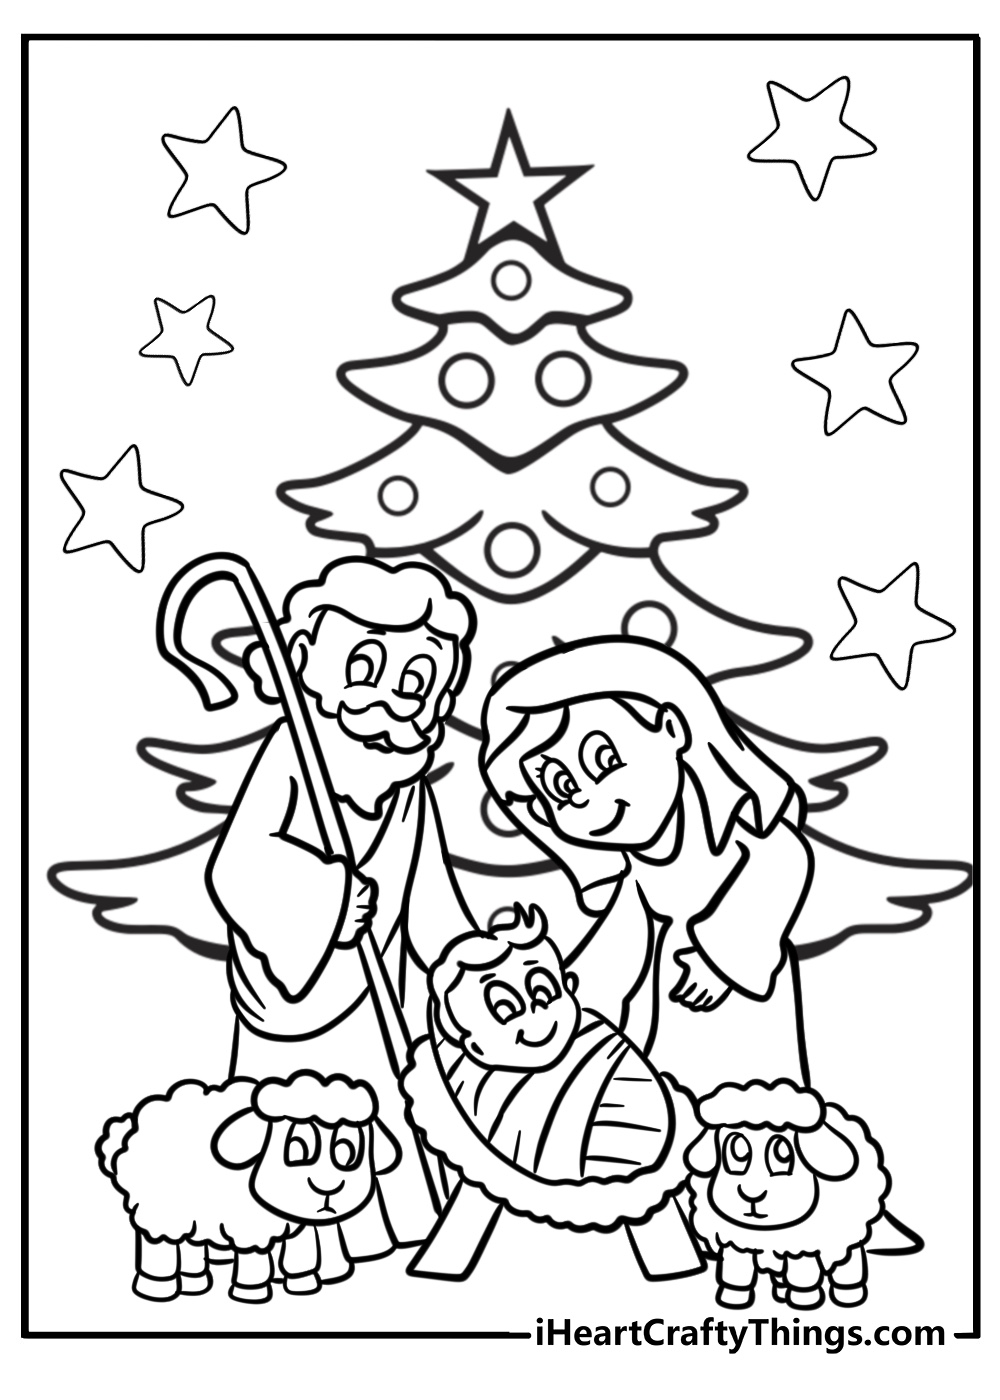 Nativity coloring pages for christmas